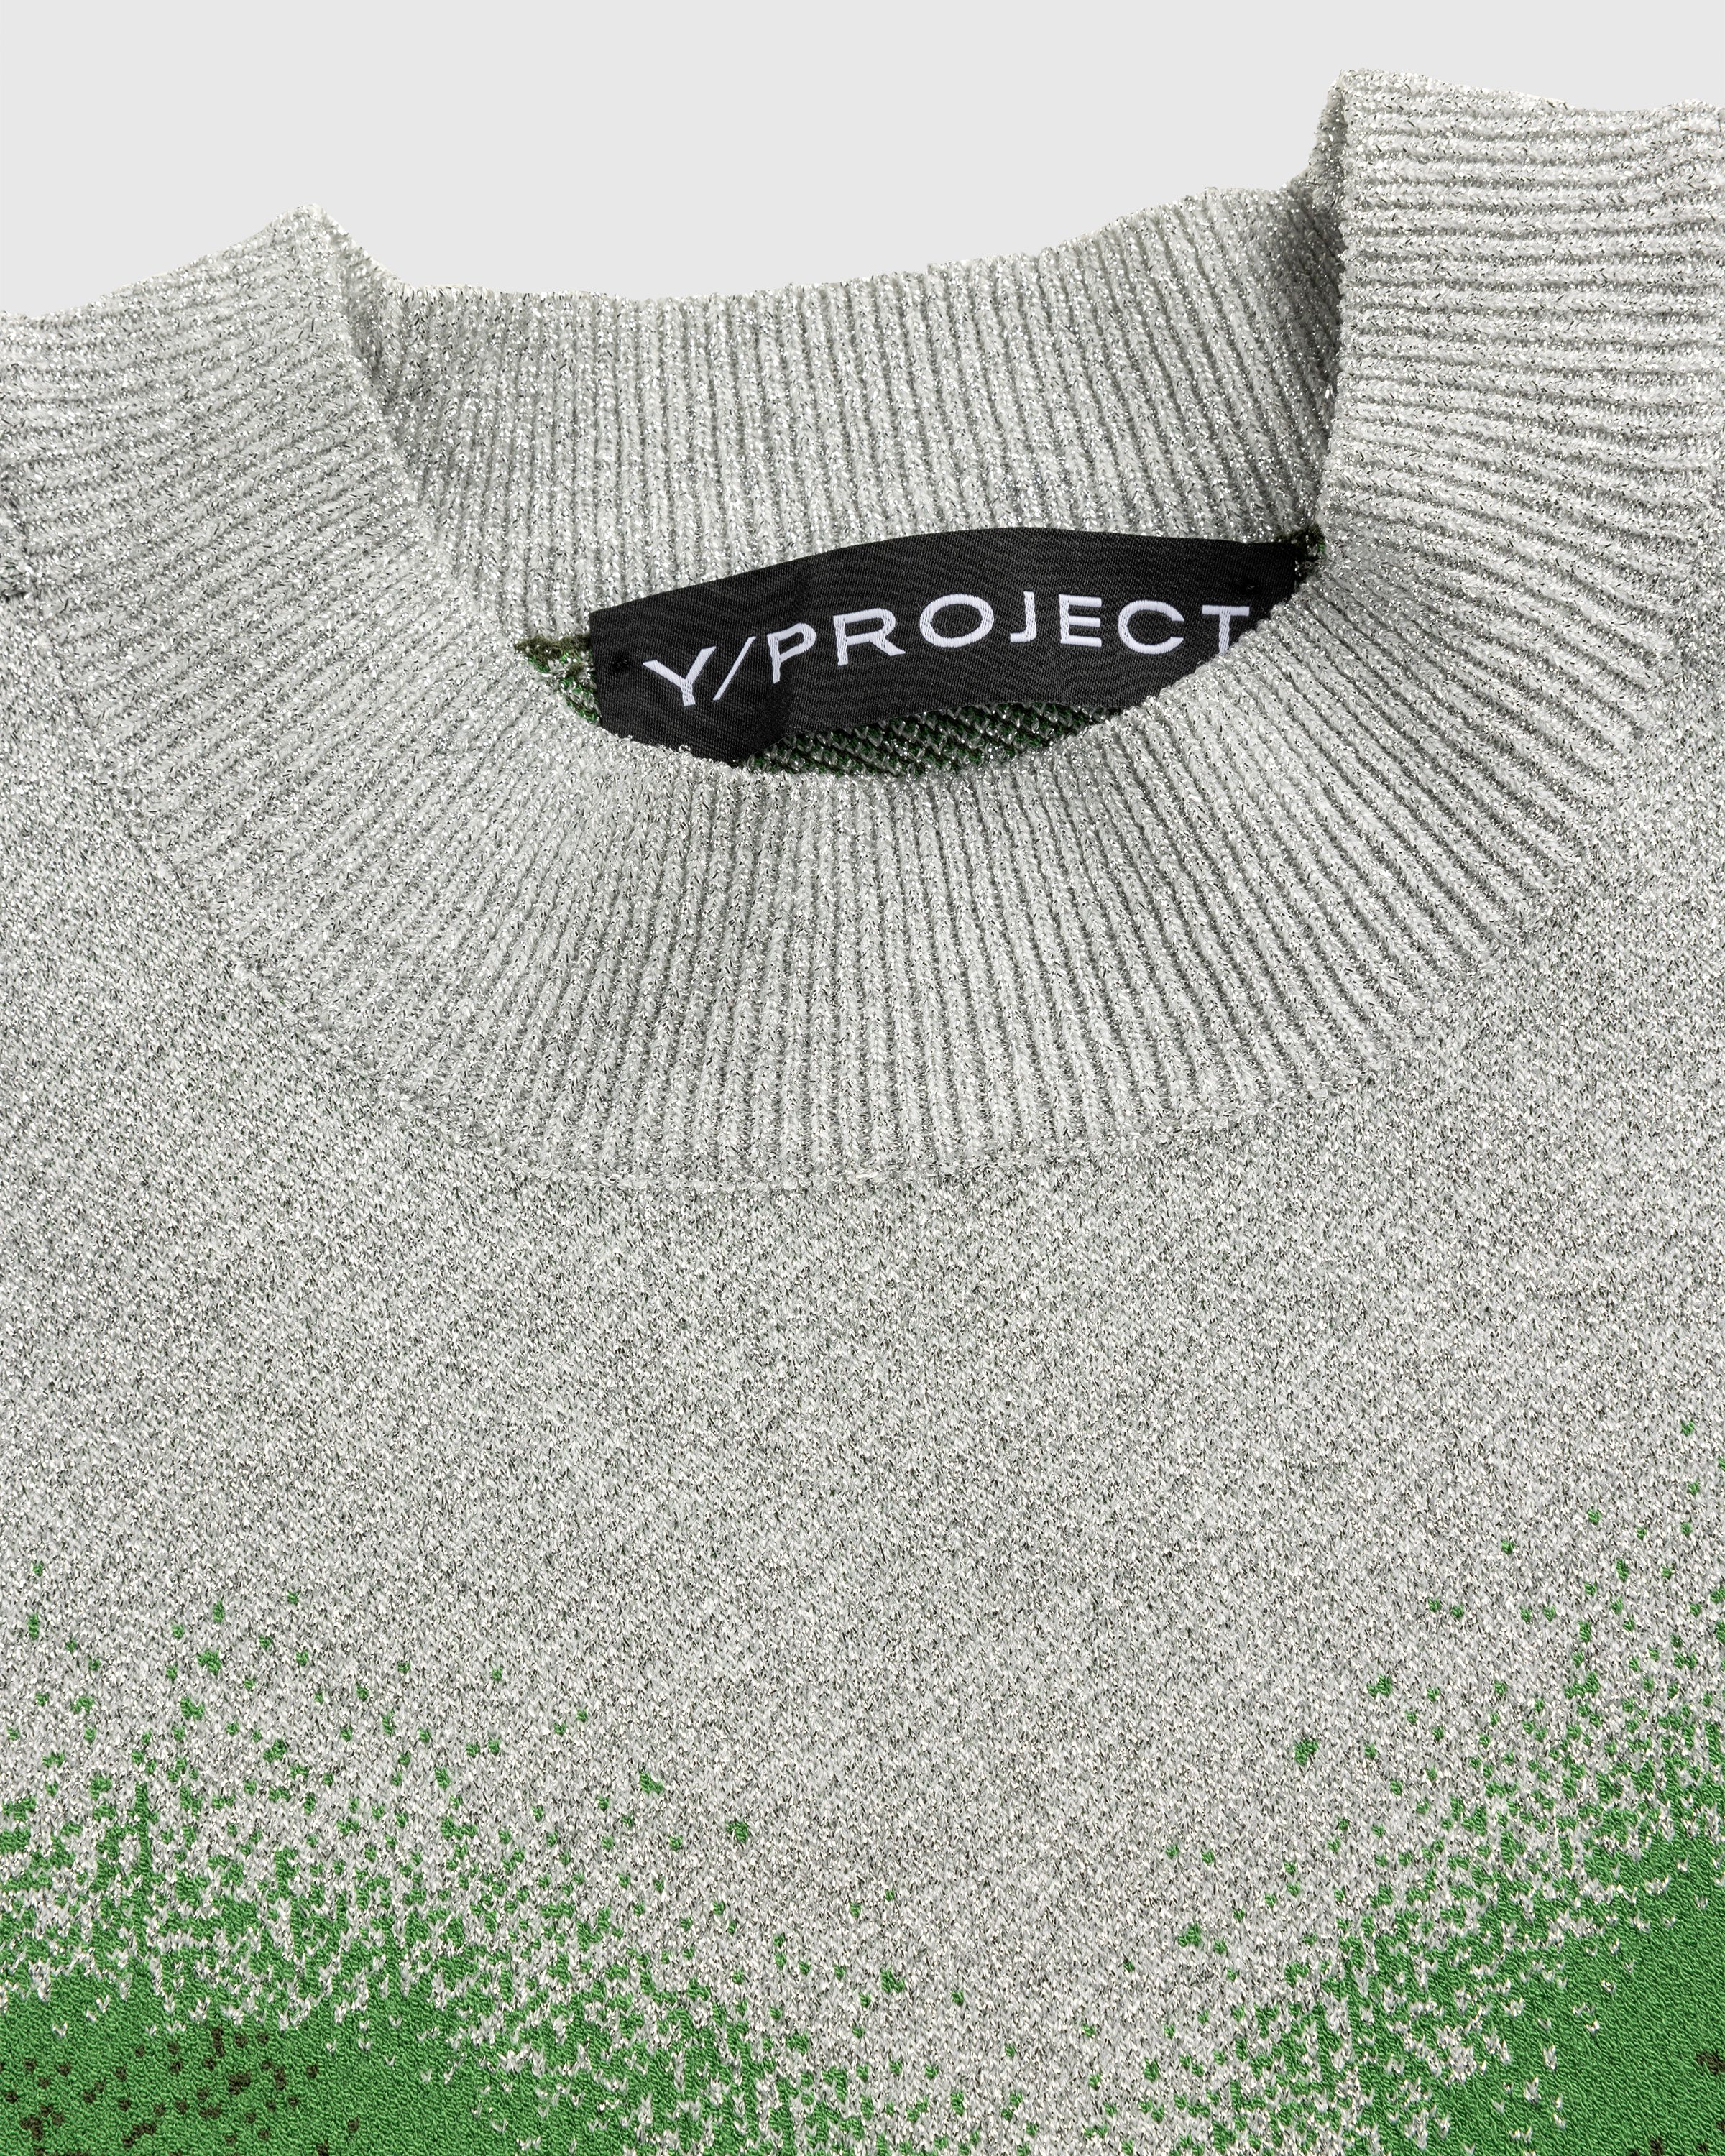 Y/Project - Gradient Knit Crew Neck Sweater Green - Clothing - Green - Image 7